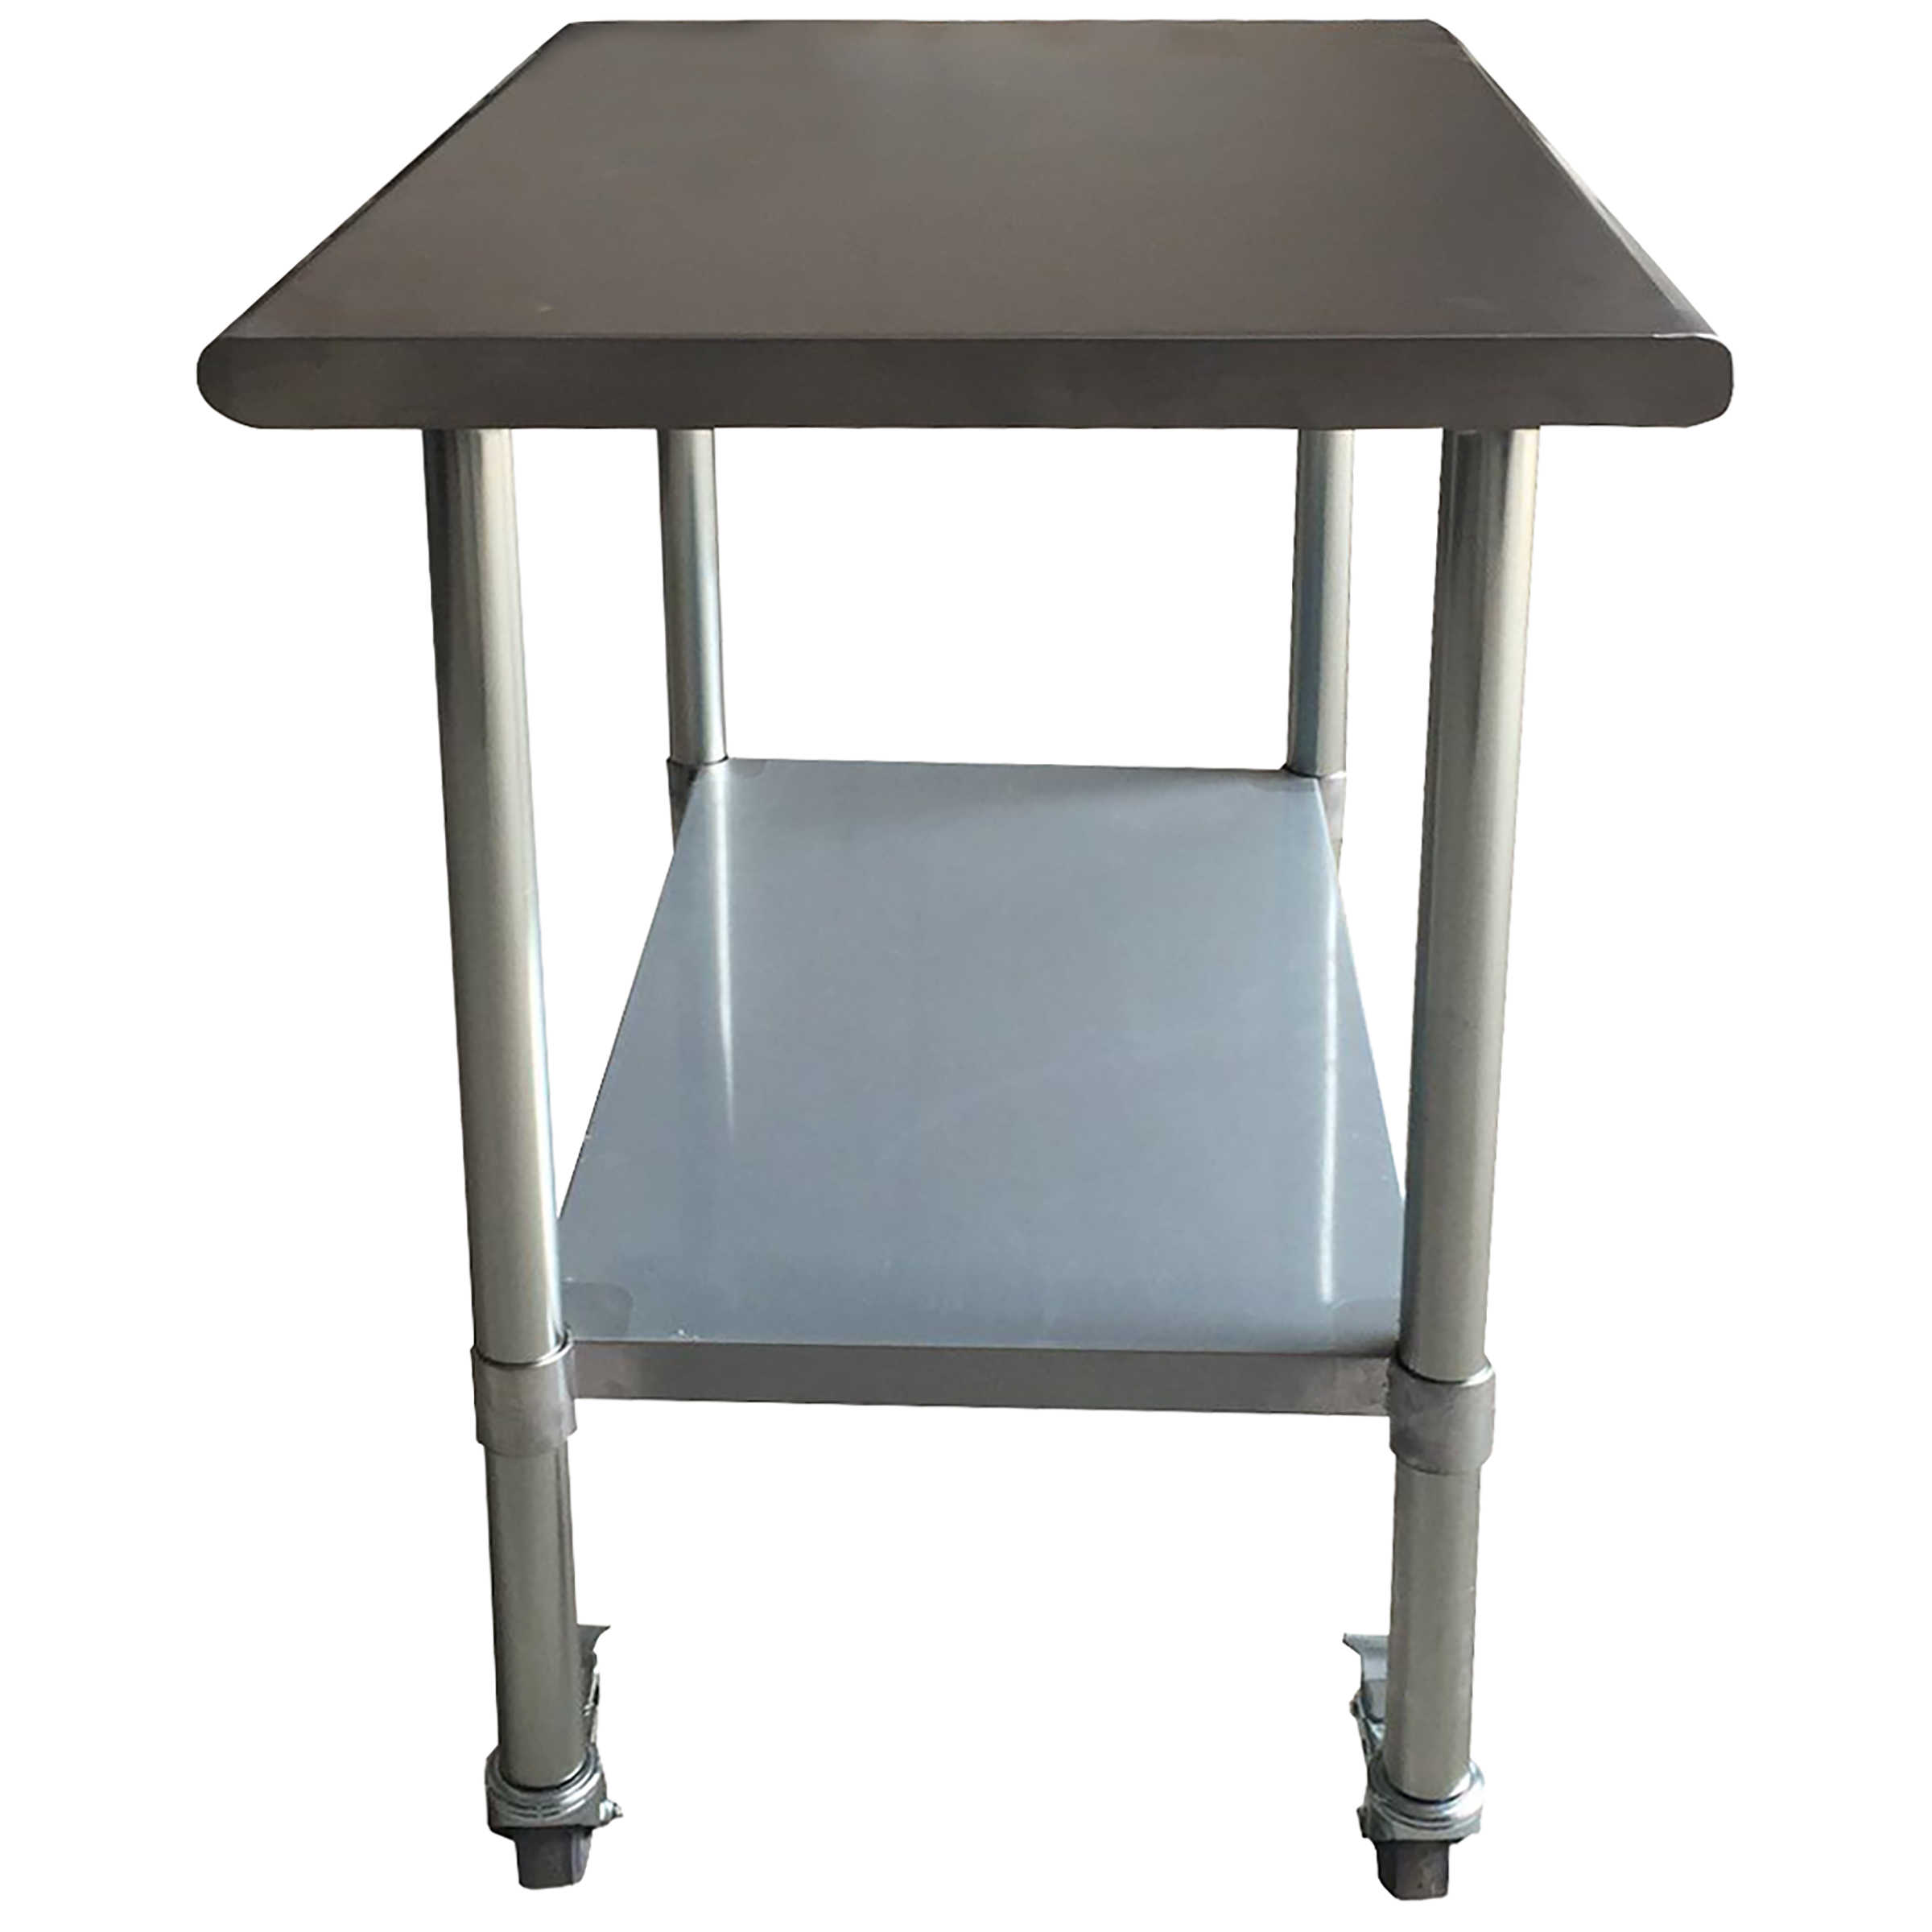 Sportsman Series Stainless Steel Work Table with Casters 24 x 60 Inches